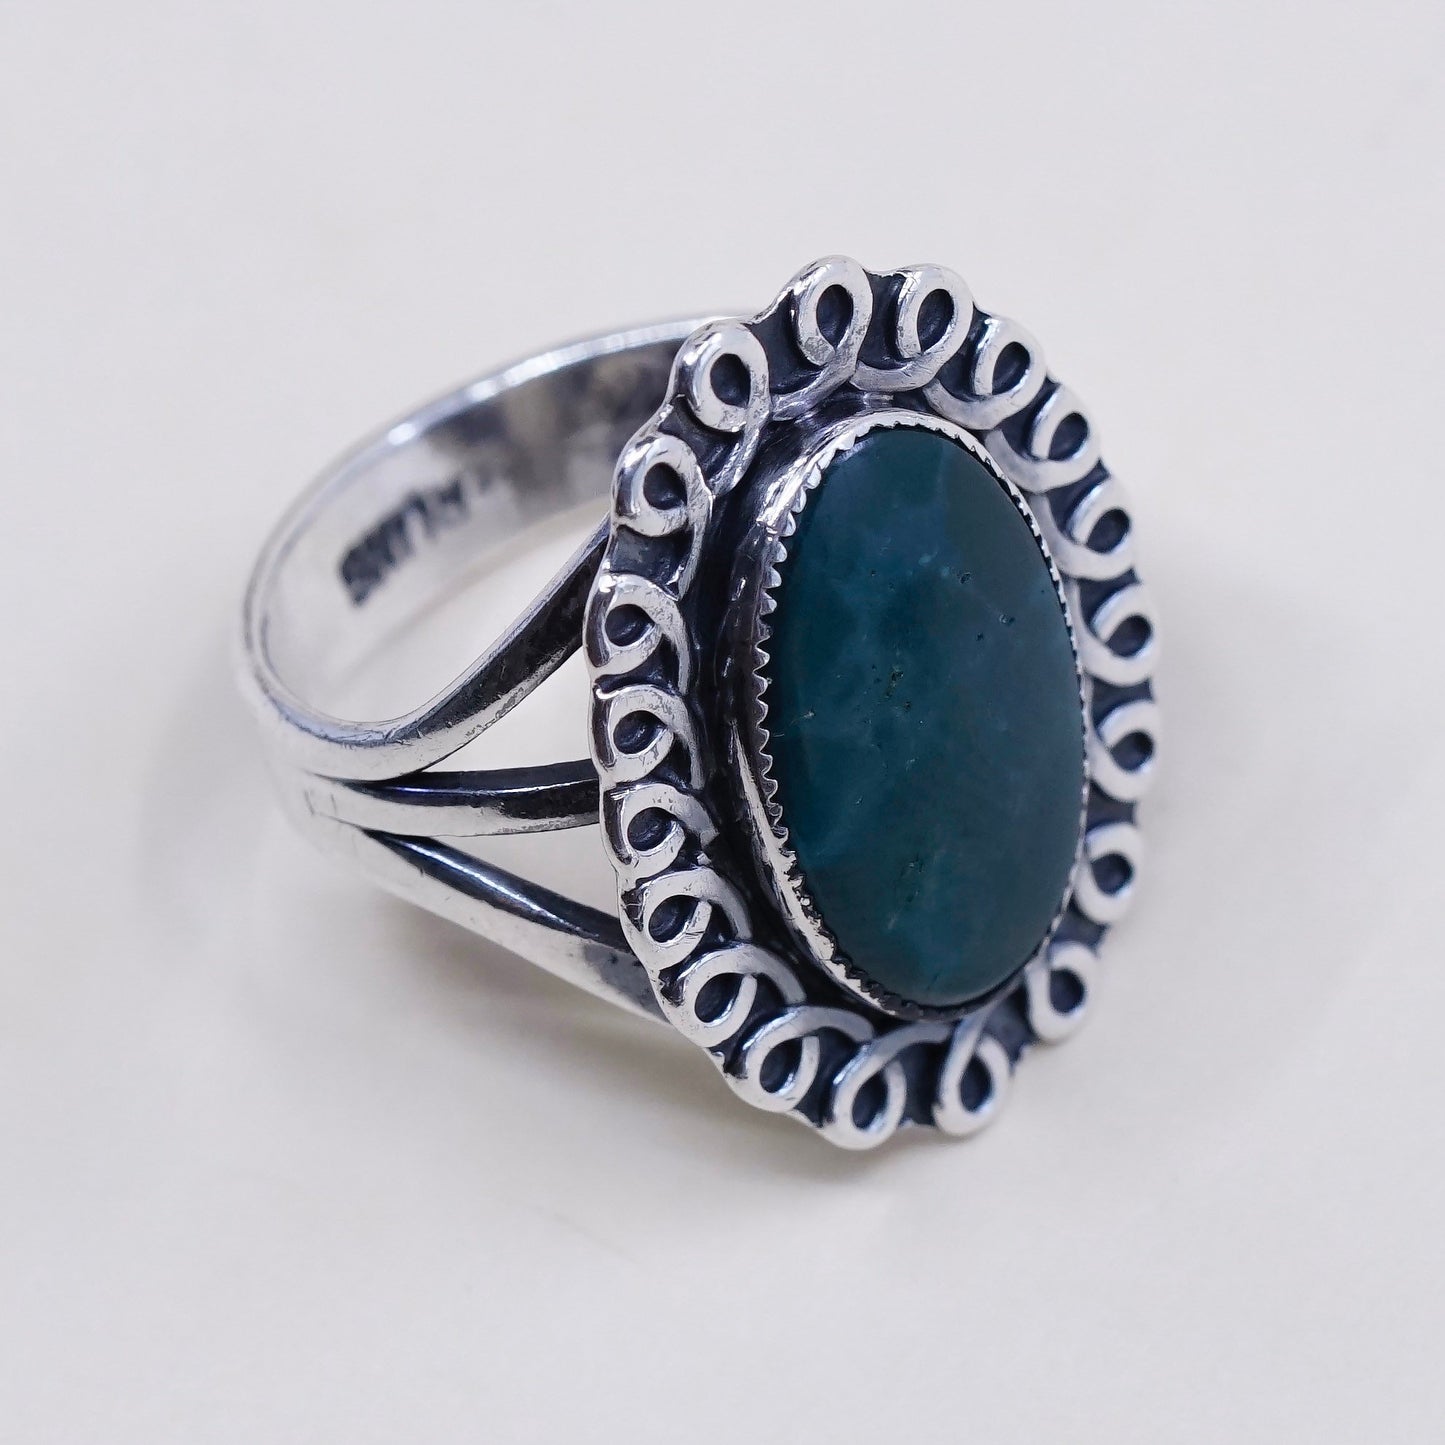 sz 4.5 Native American sterling 925 silver ring w/ turquoise, southwestern